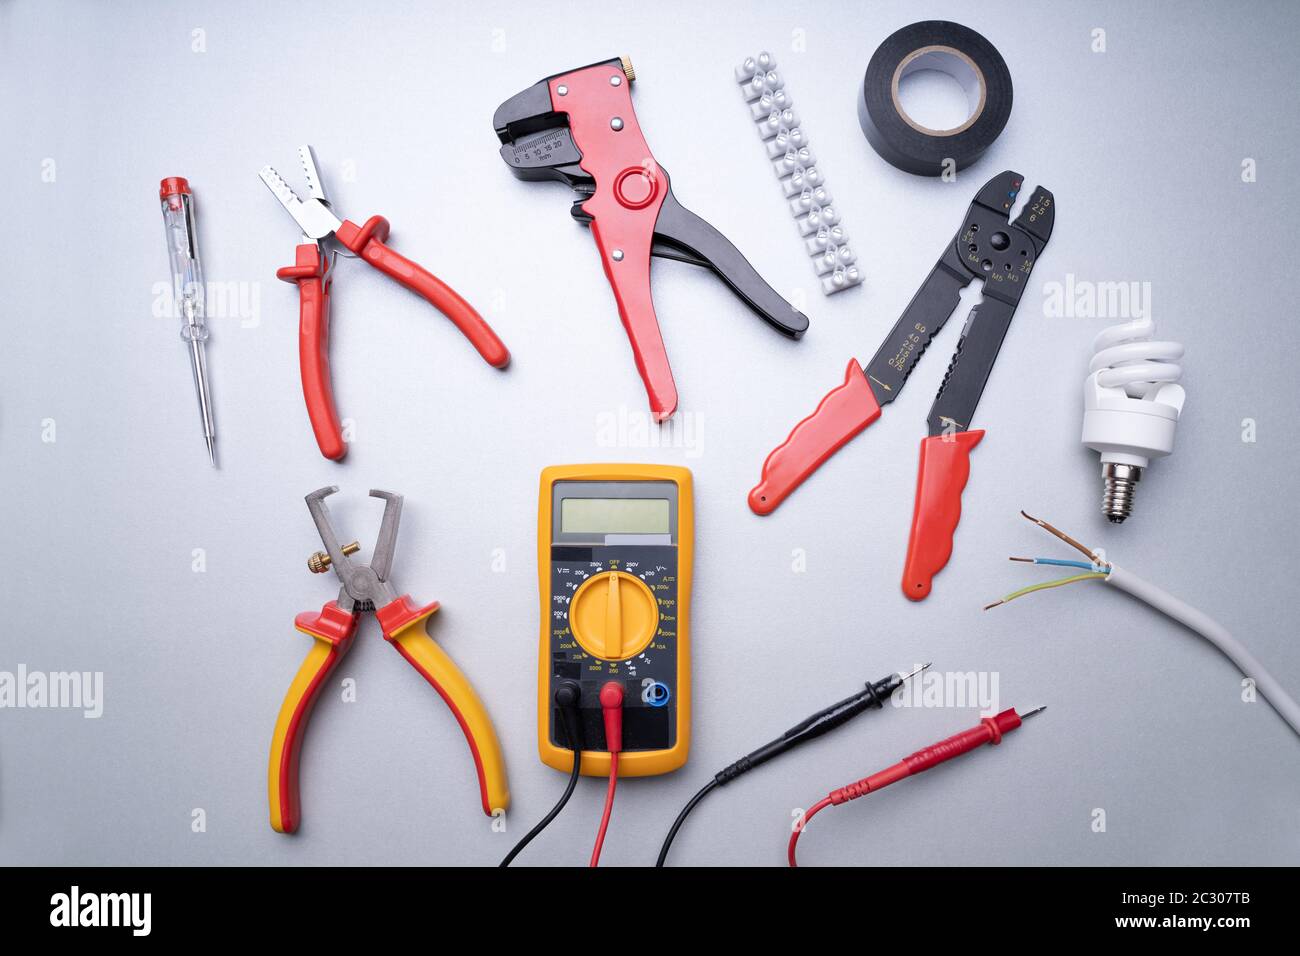 Tool box with electrical tools and components Stock Photo - Alamy